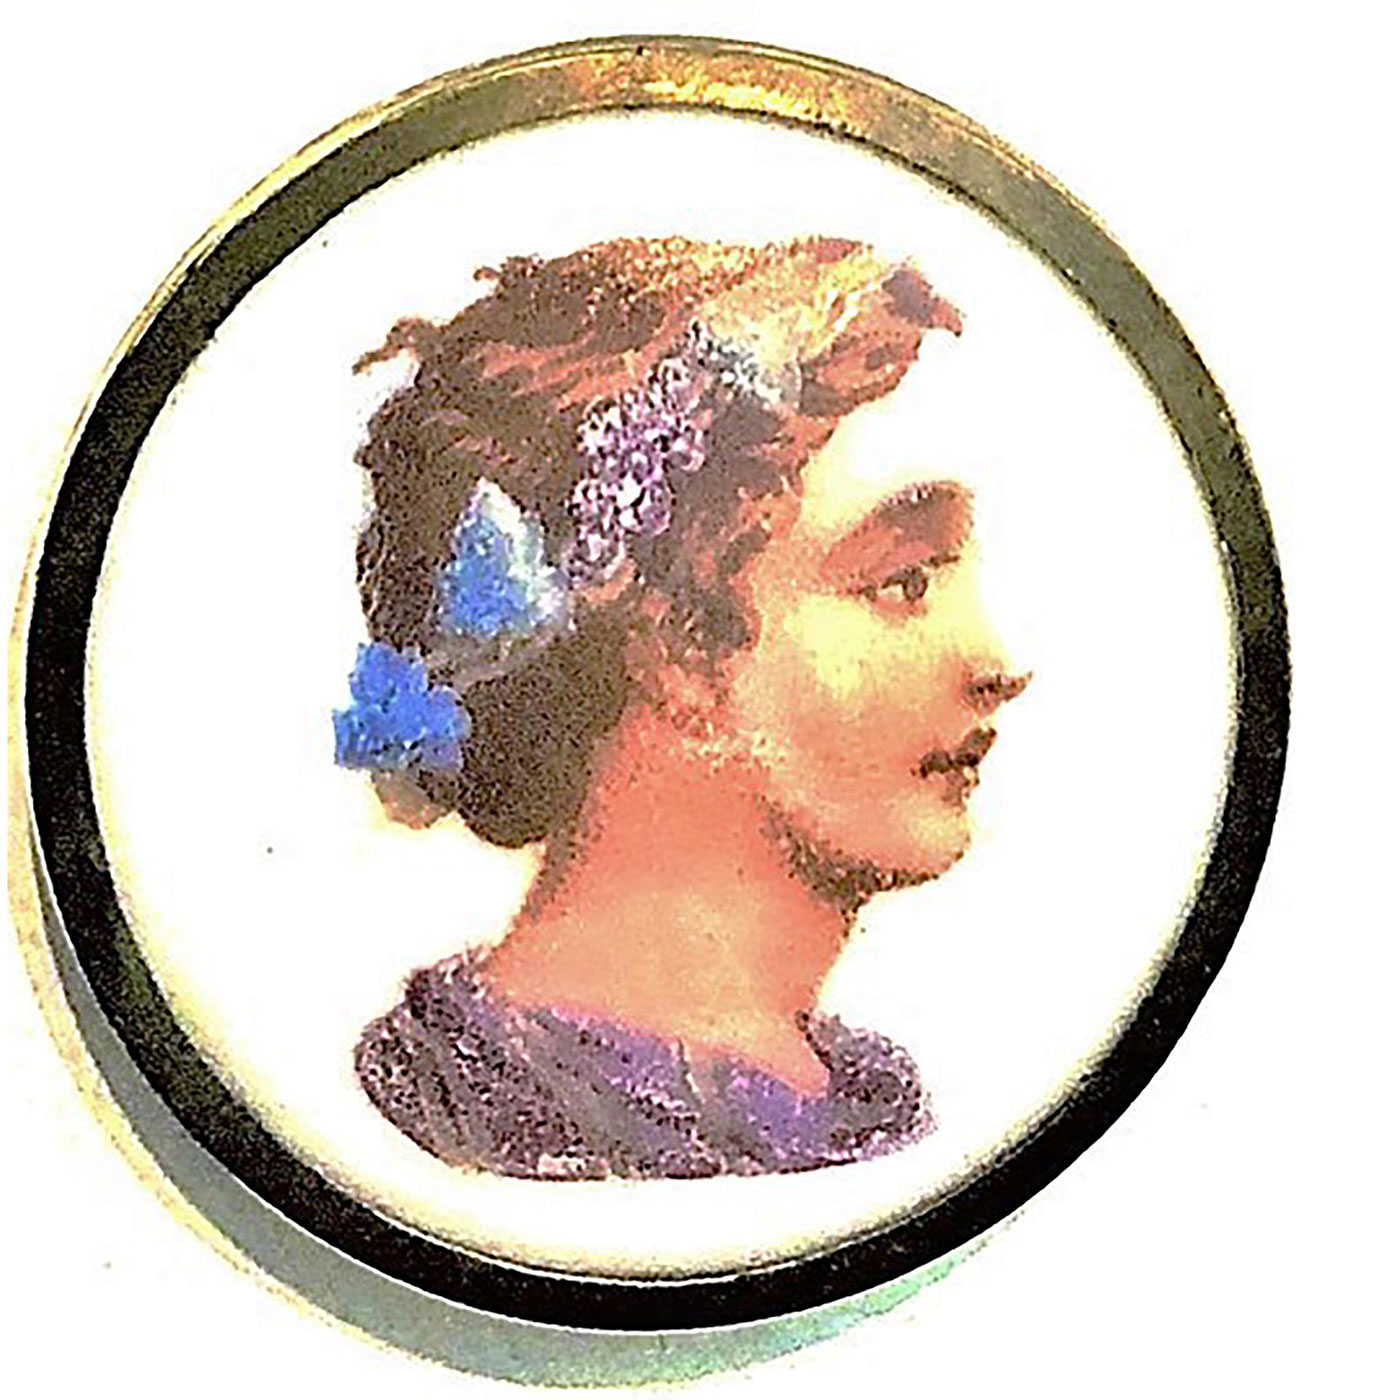 A SMALL CARD OF DIVISION ONE LIVERPOOL TRABSFER BUTTONS - Image 3 of 5